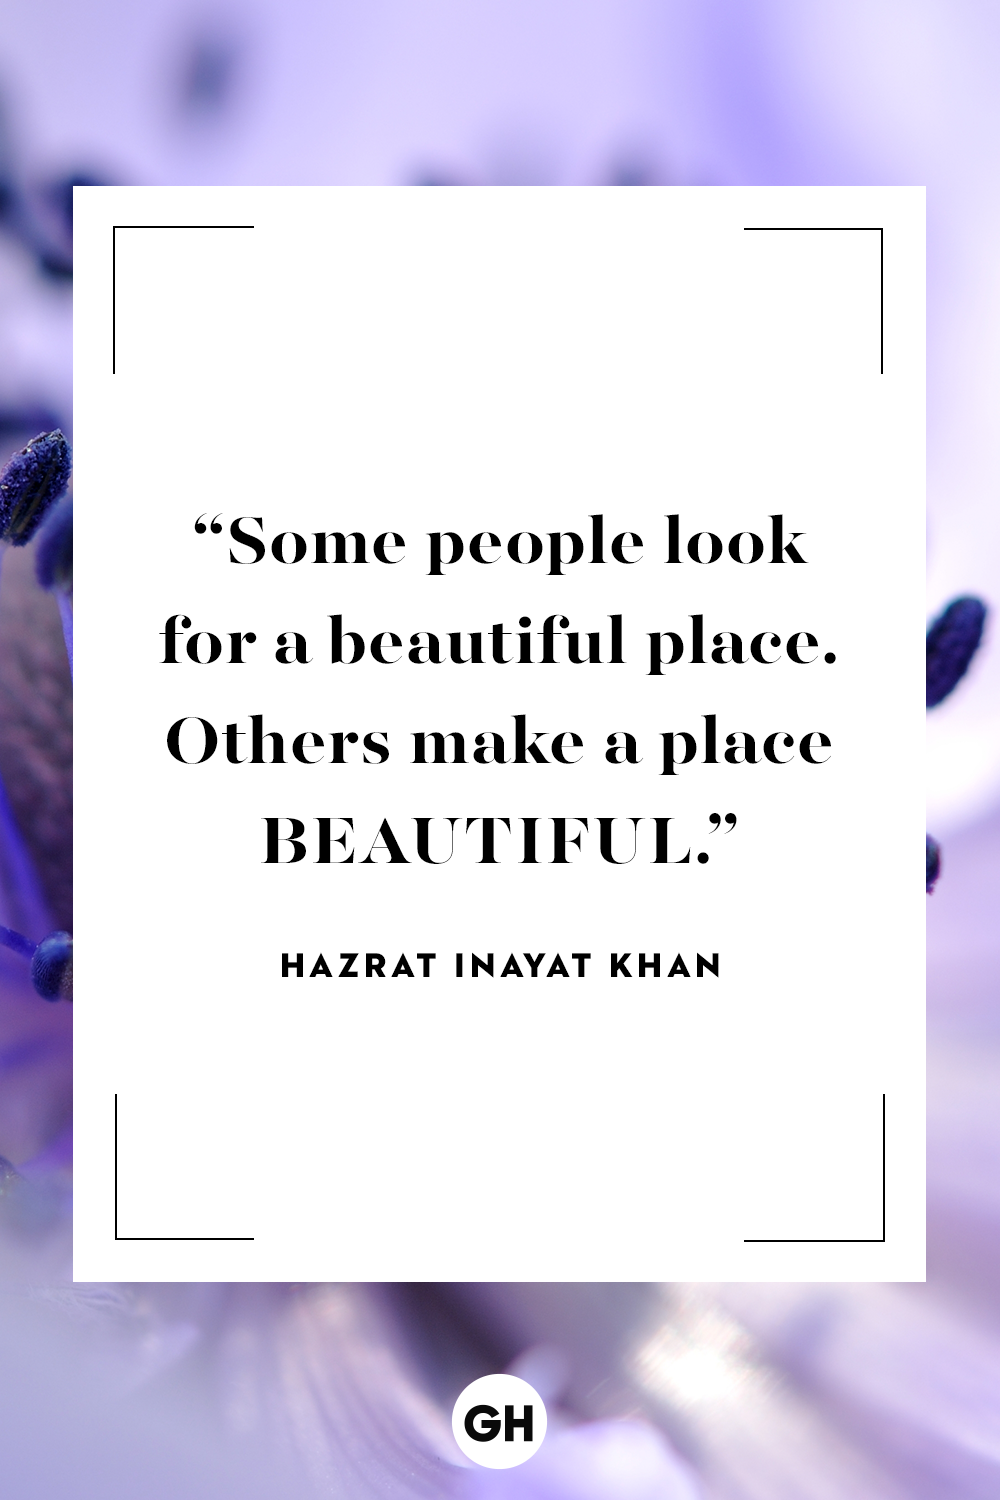 inspirational quotes about being beautiful